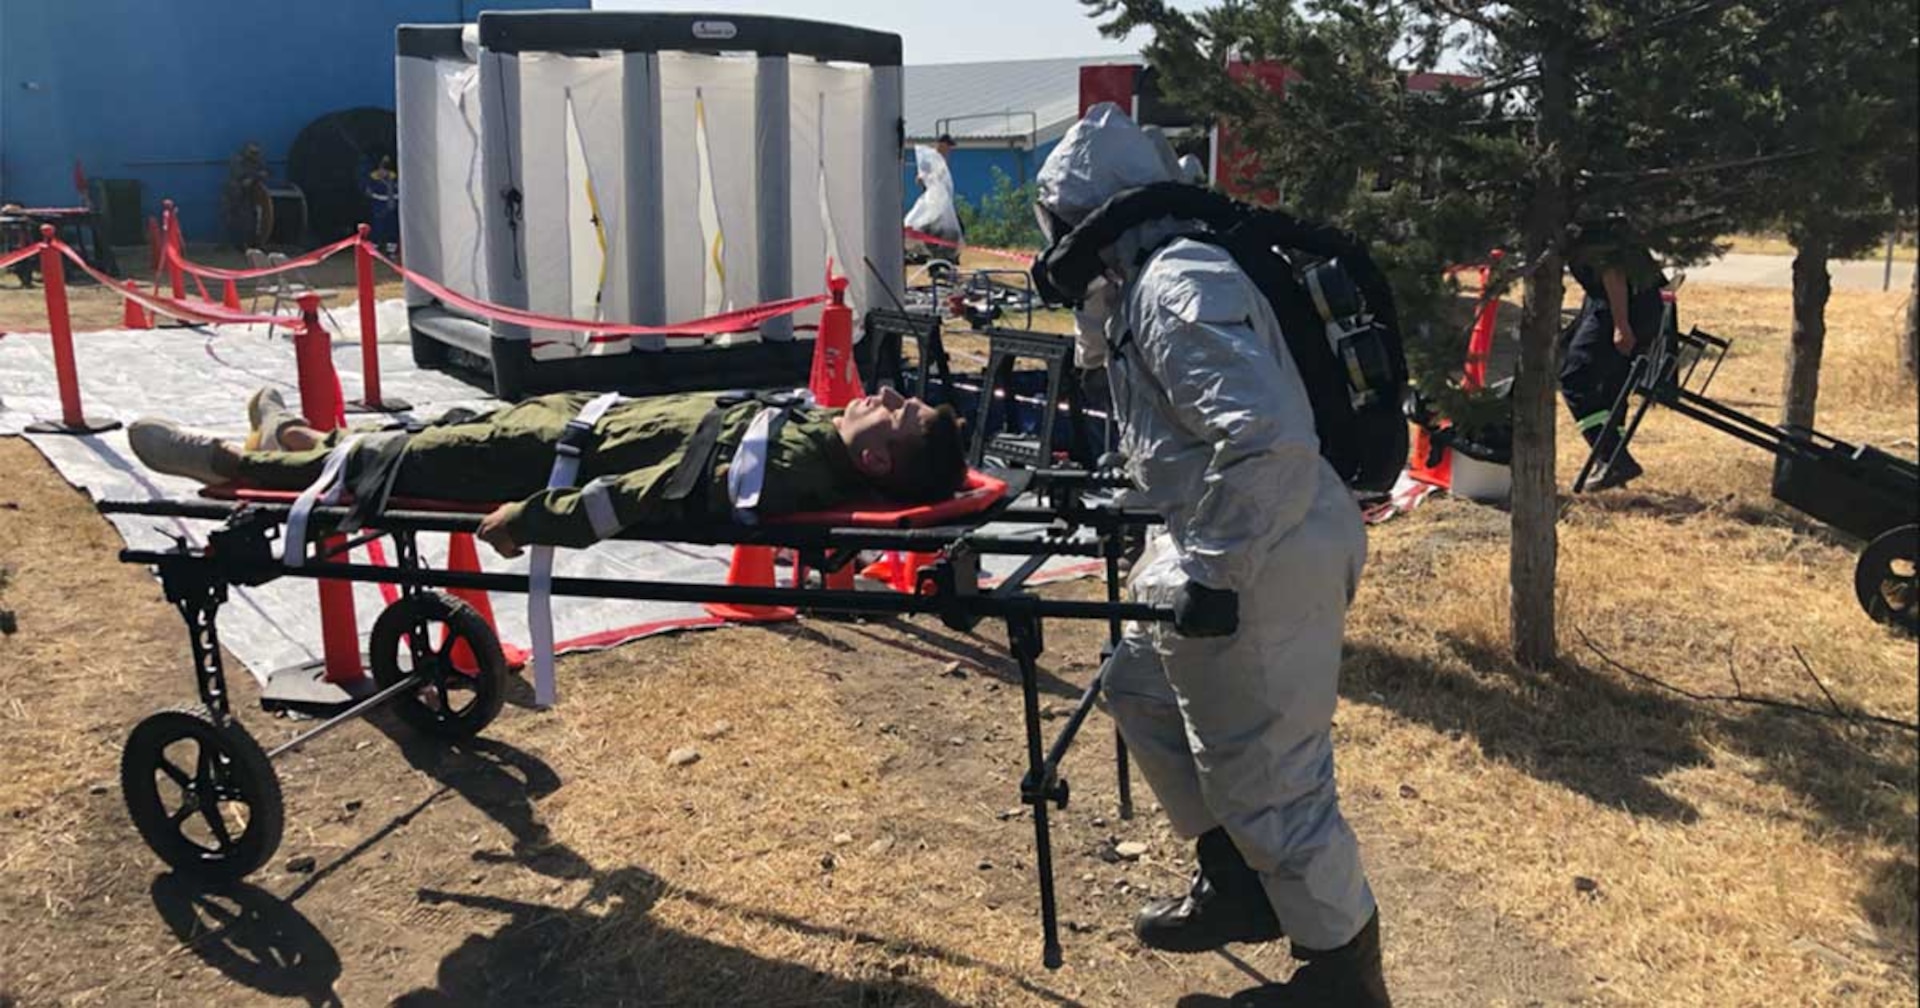 DTRA’s Building Partner Capacity Department hosted CBRN/CWMD Interagency Field Training Exercise (FTX) in Tbilisi, Georgia, 9-19 August 2022. The Interagency FTX focused on strategic, operational, and tactical CBRN and CWMD capabilities of Georgian’s response units.